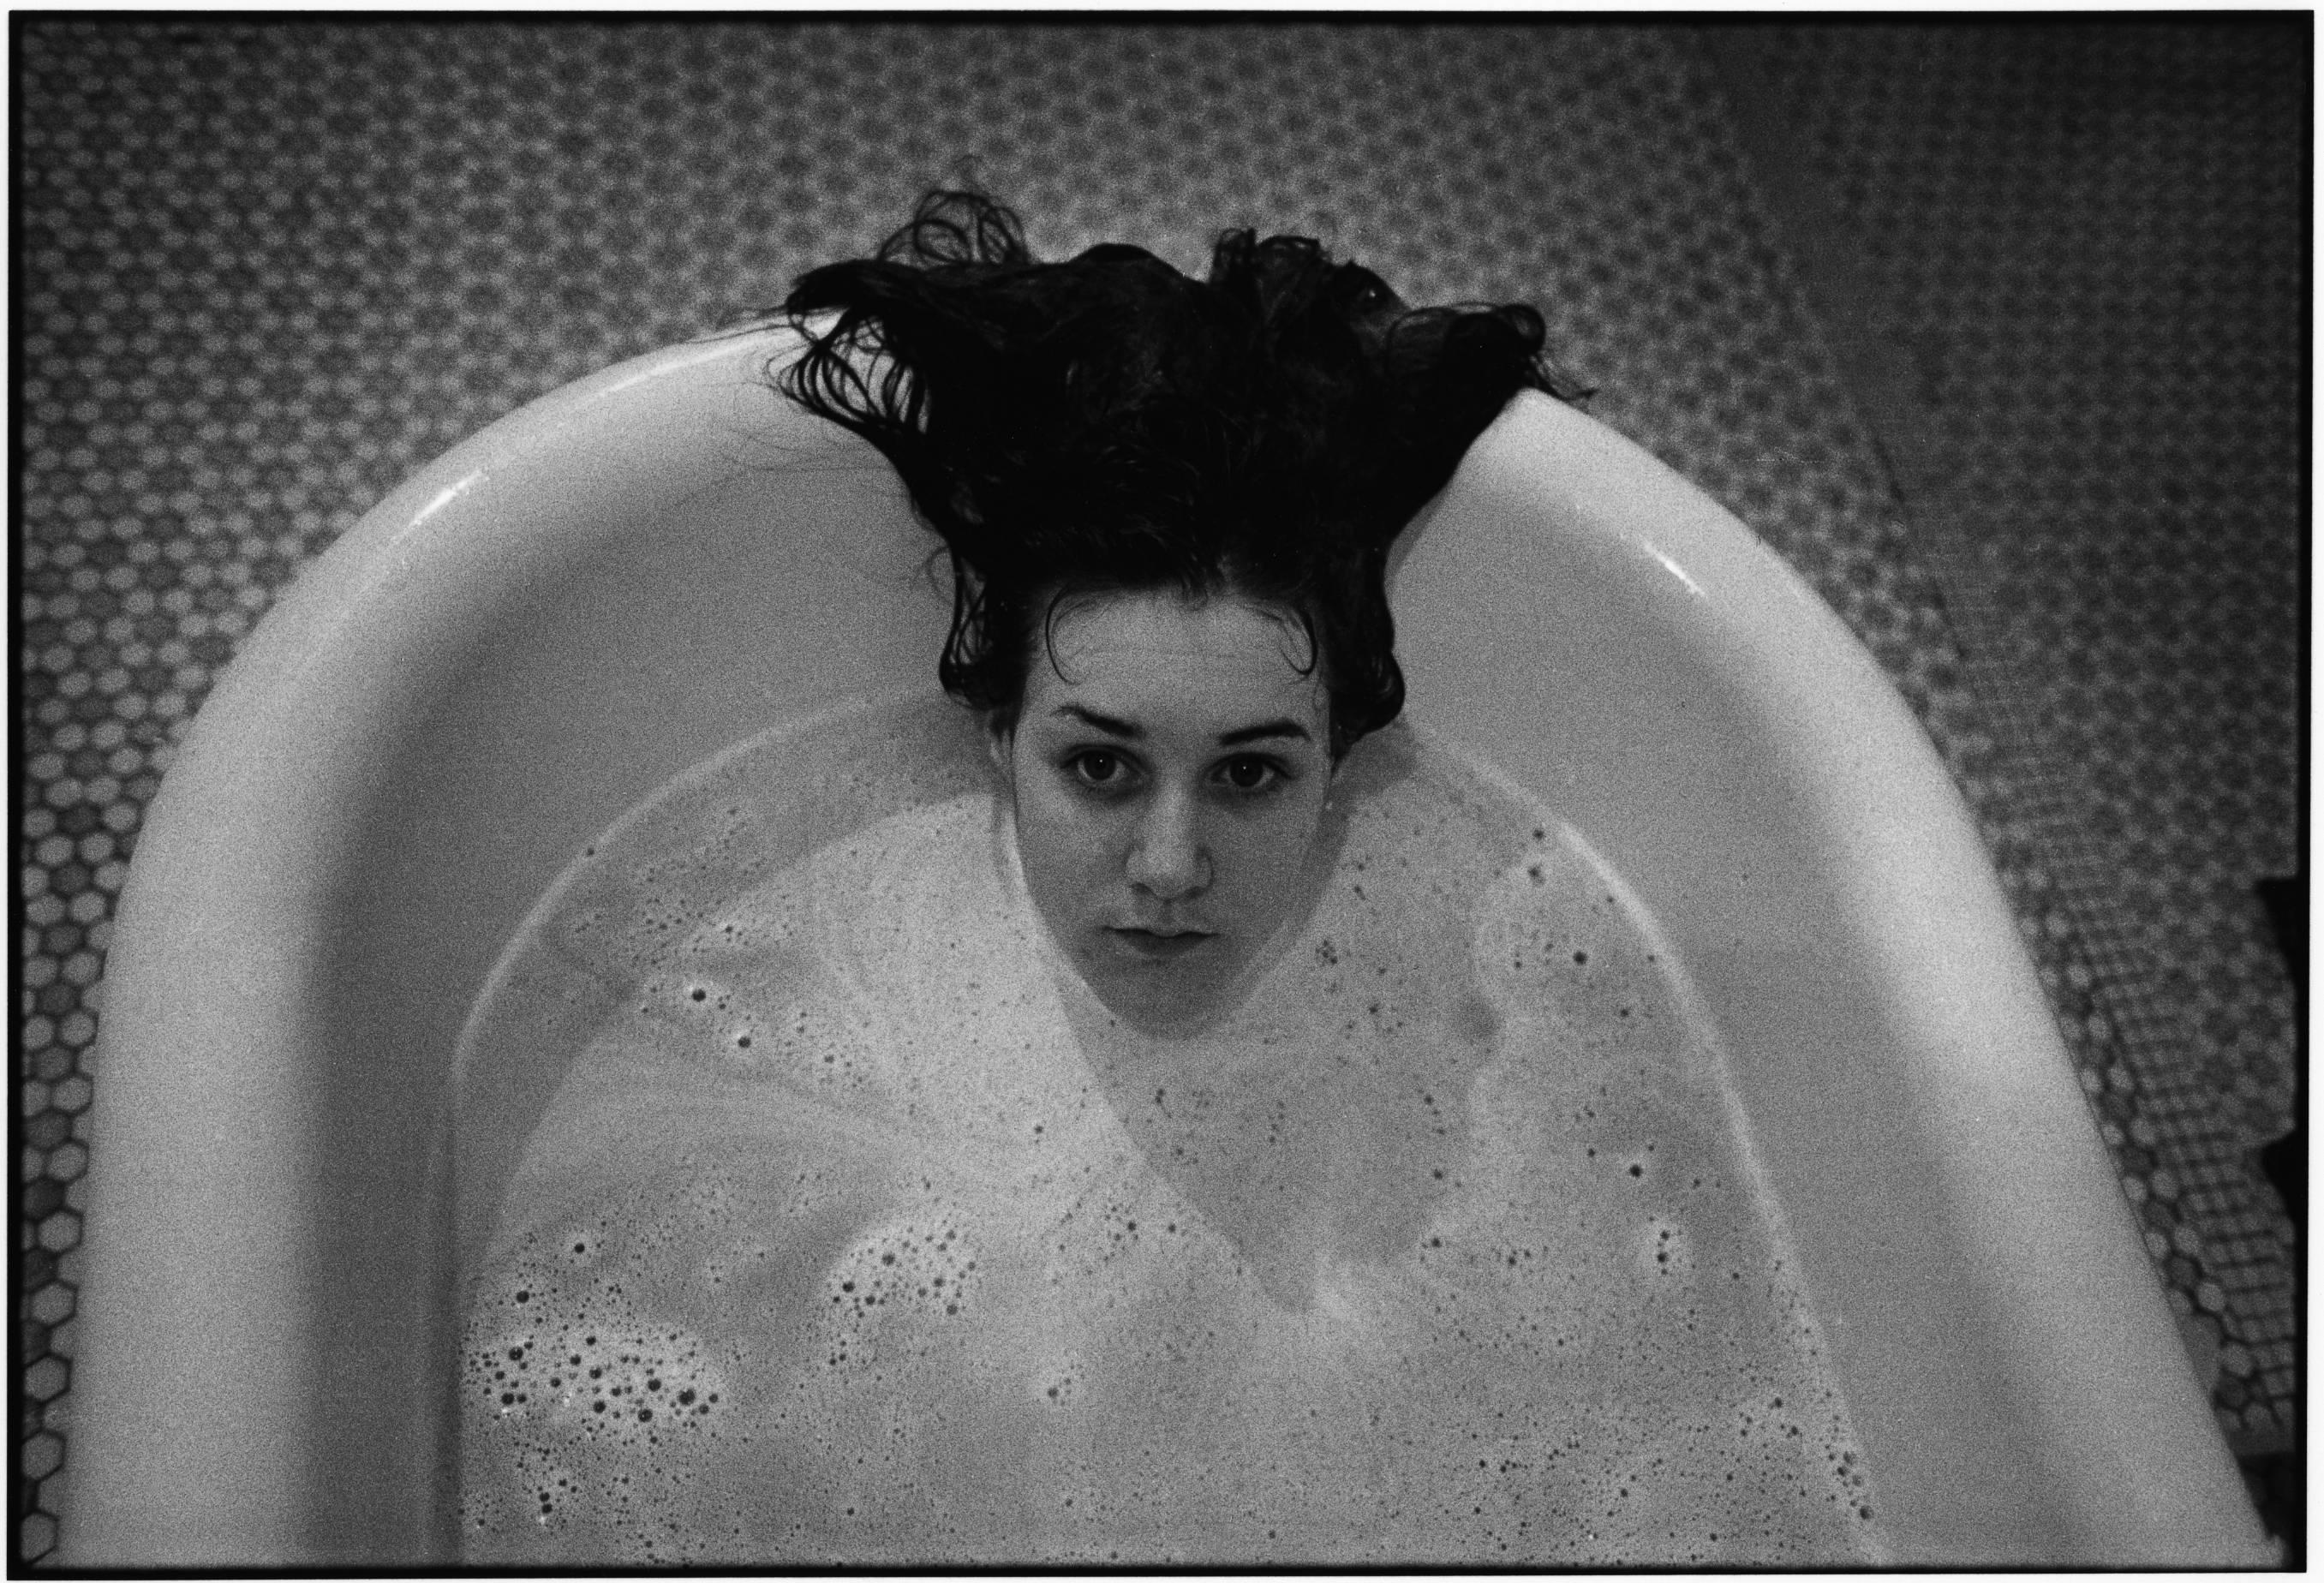 Mary Ellen Mark Black and White Photograph - Laurie in the bathtub